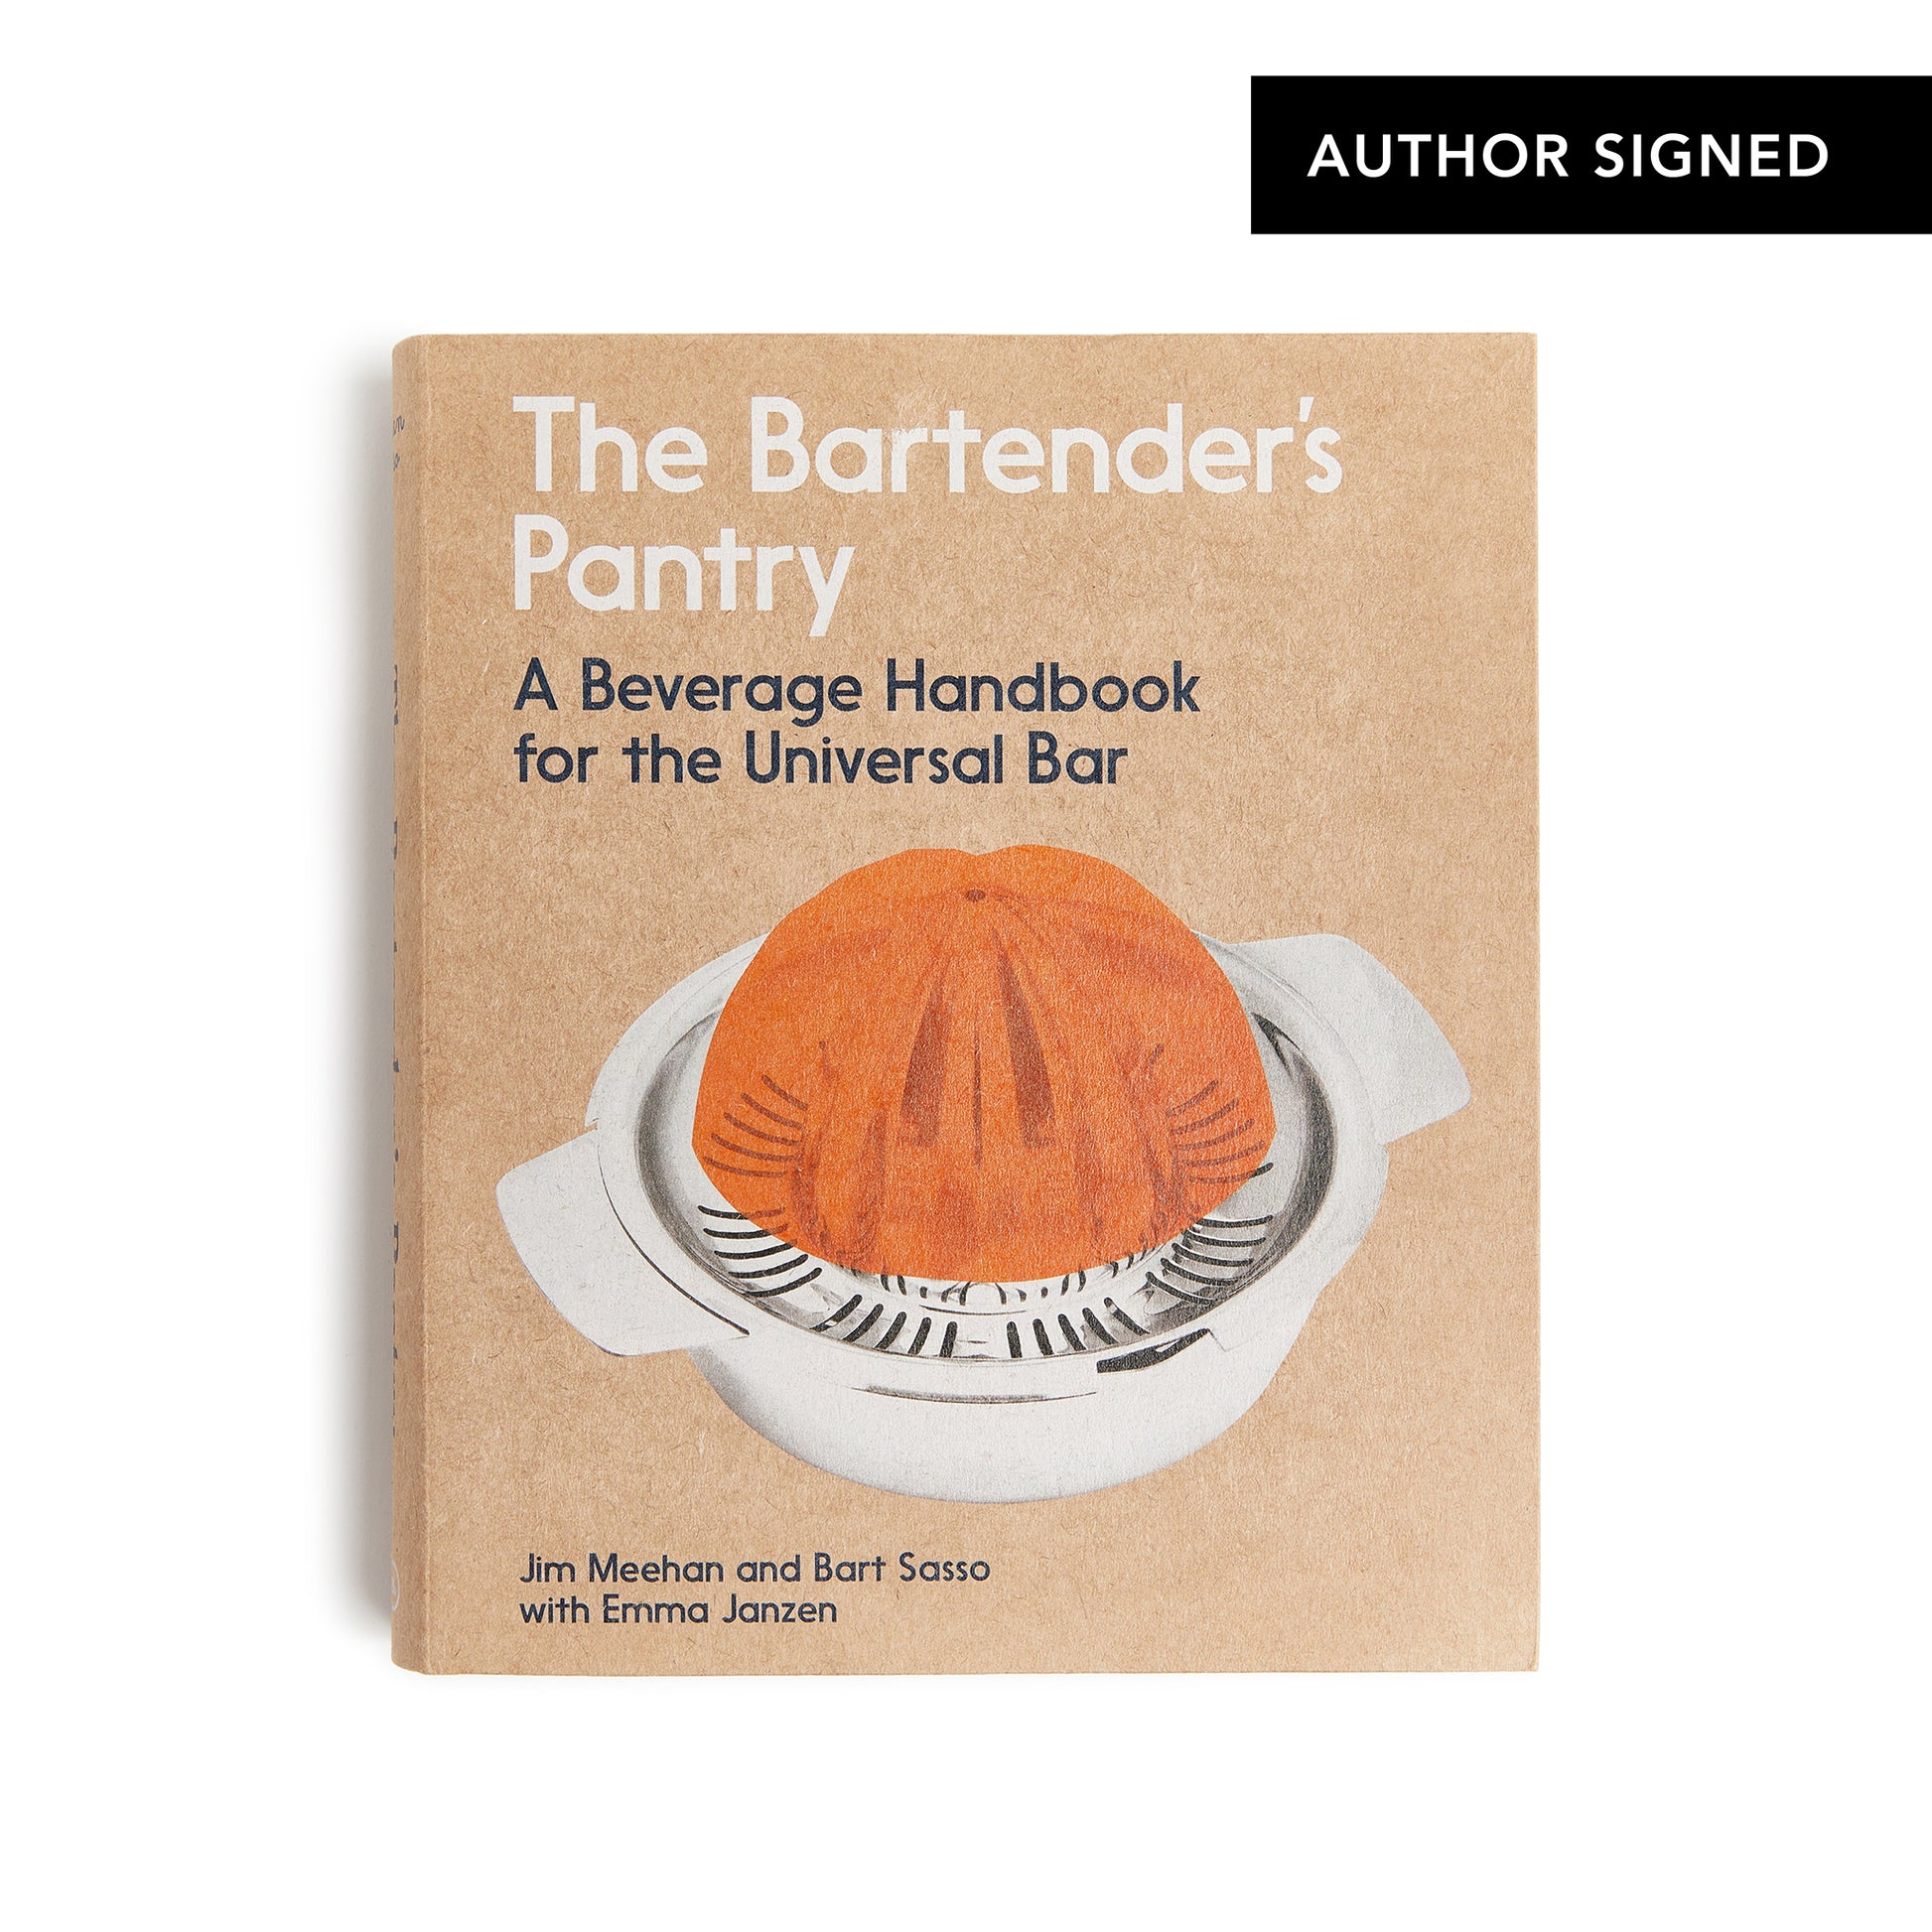 THE BARTENDER'S PANTRY [AUTHOR SIGNED]